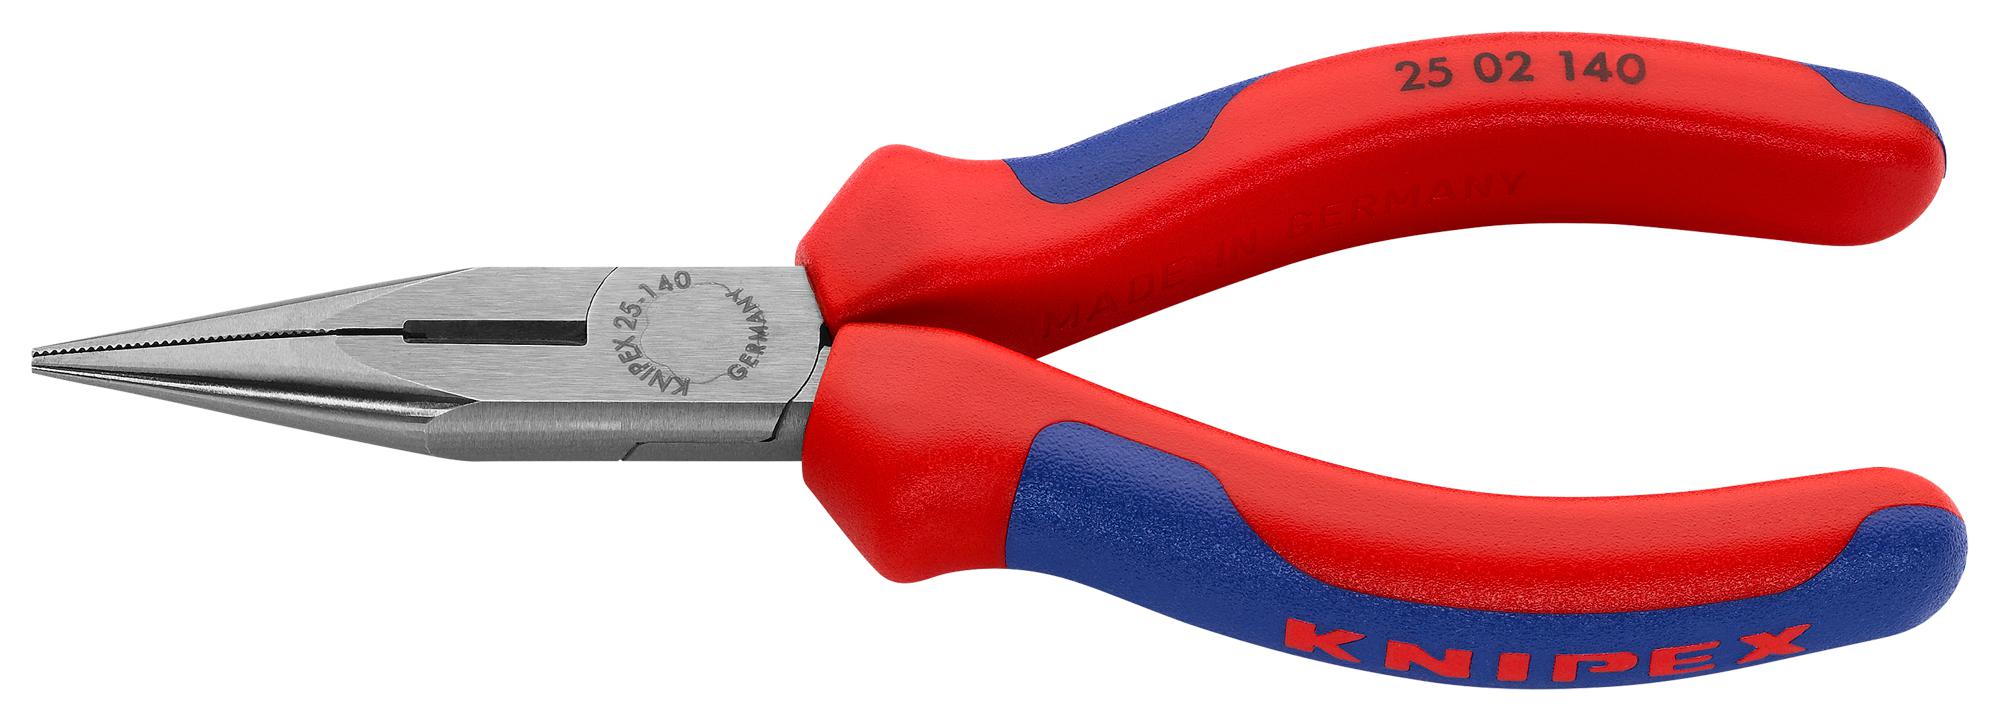 Knipex 25 02 140 Cutter, Side, Chain Nose